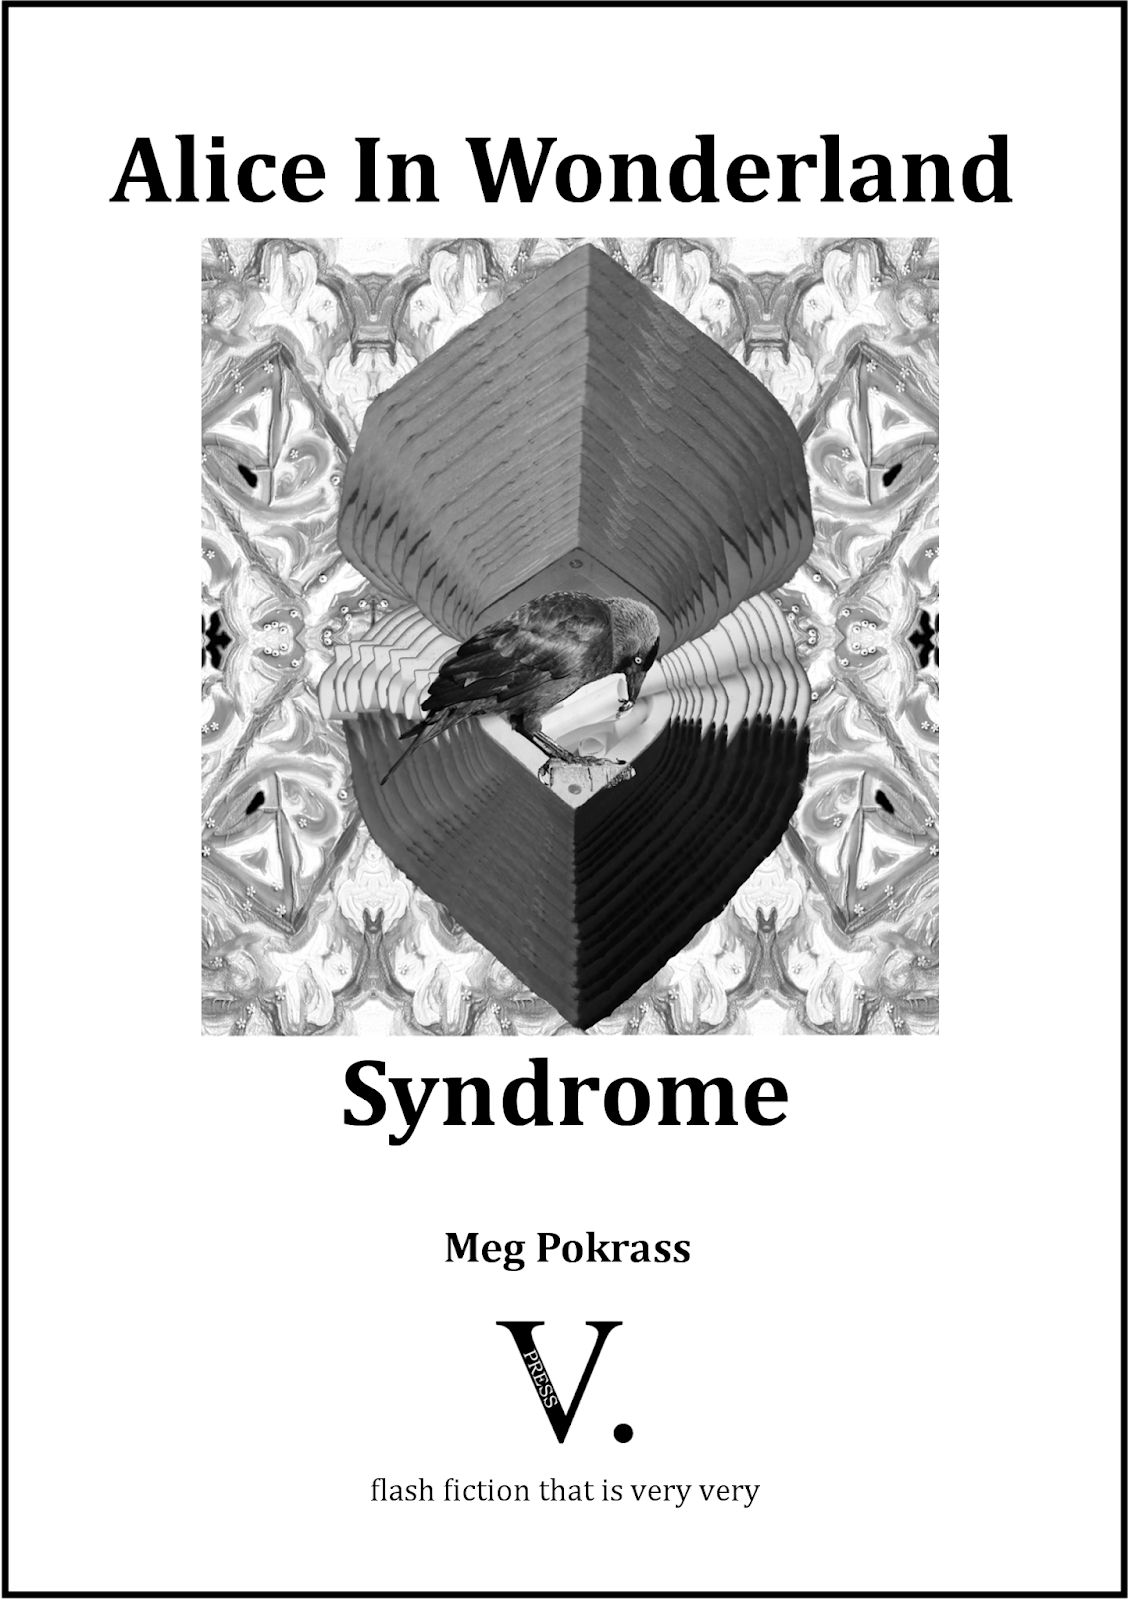 Alice In Wonderland Syndrome Meg Pokrass final front cover only